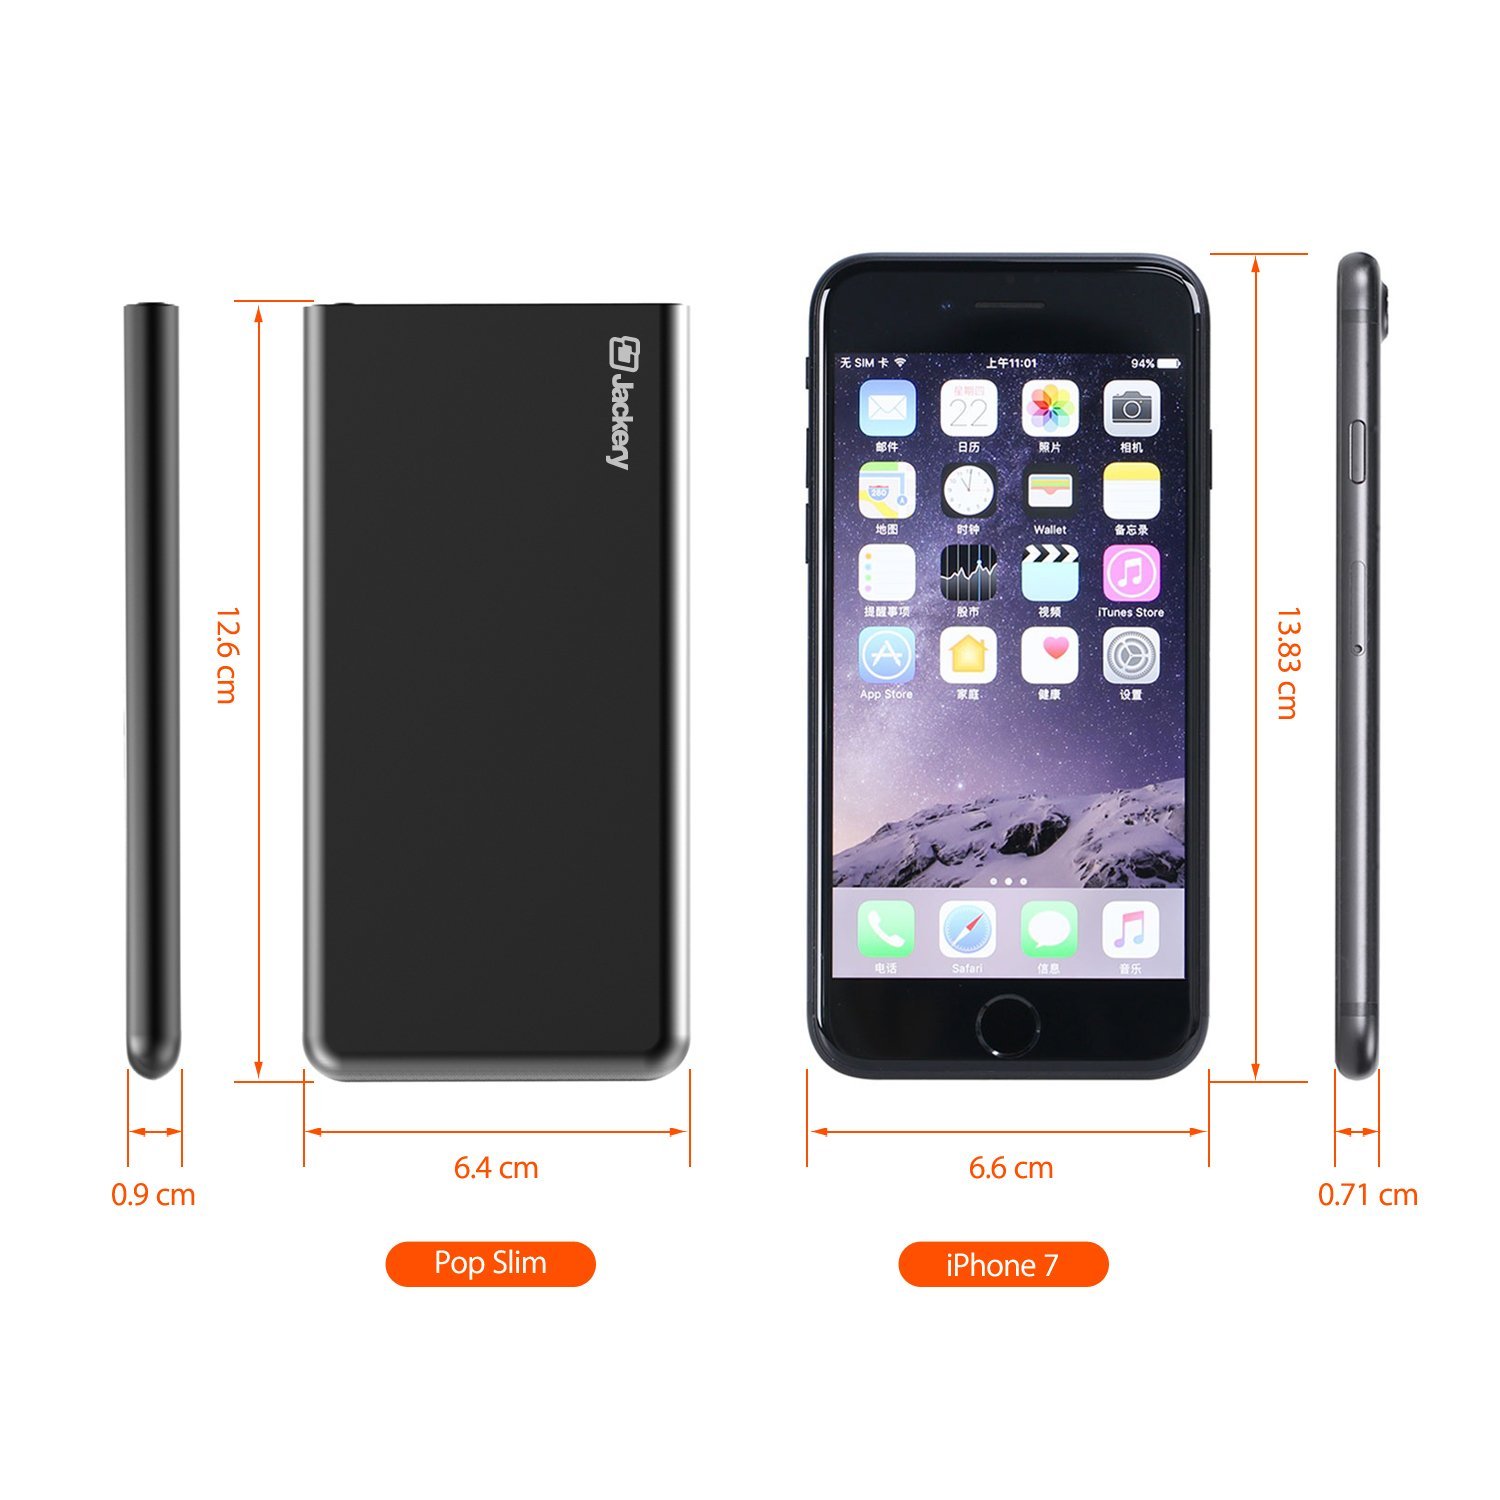 As Slim As Iphone Jackery Pop Slim 5000mah External Battery Pack Ultra Slim Lightweight Charger Portable Powerbank With Aluminum Shell For Iphone 6 Iphone 6s Iphone 7 7 Plus Charge With Power